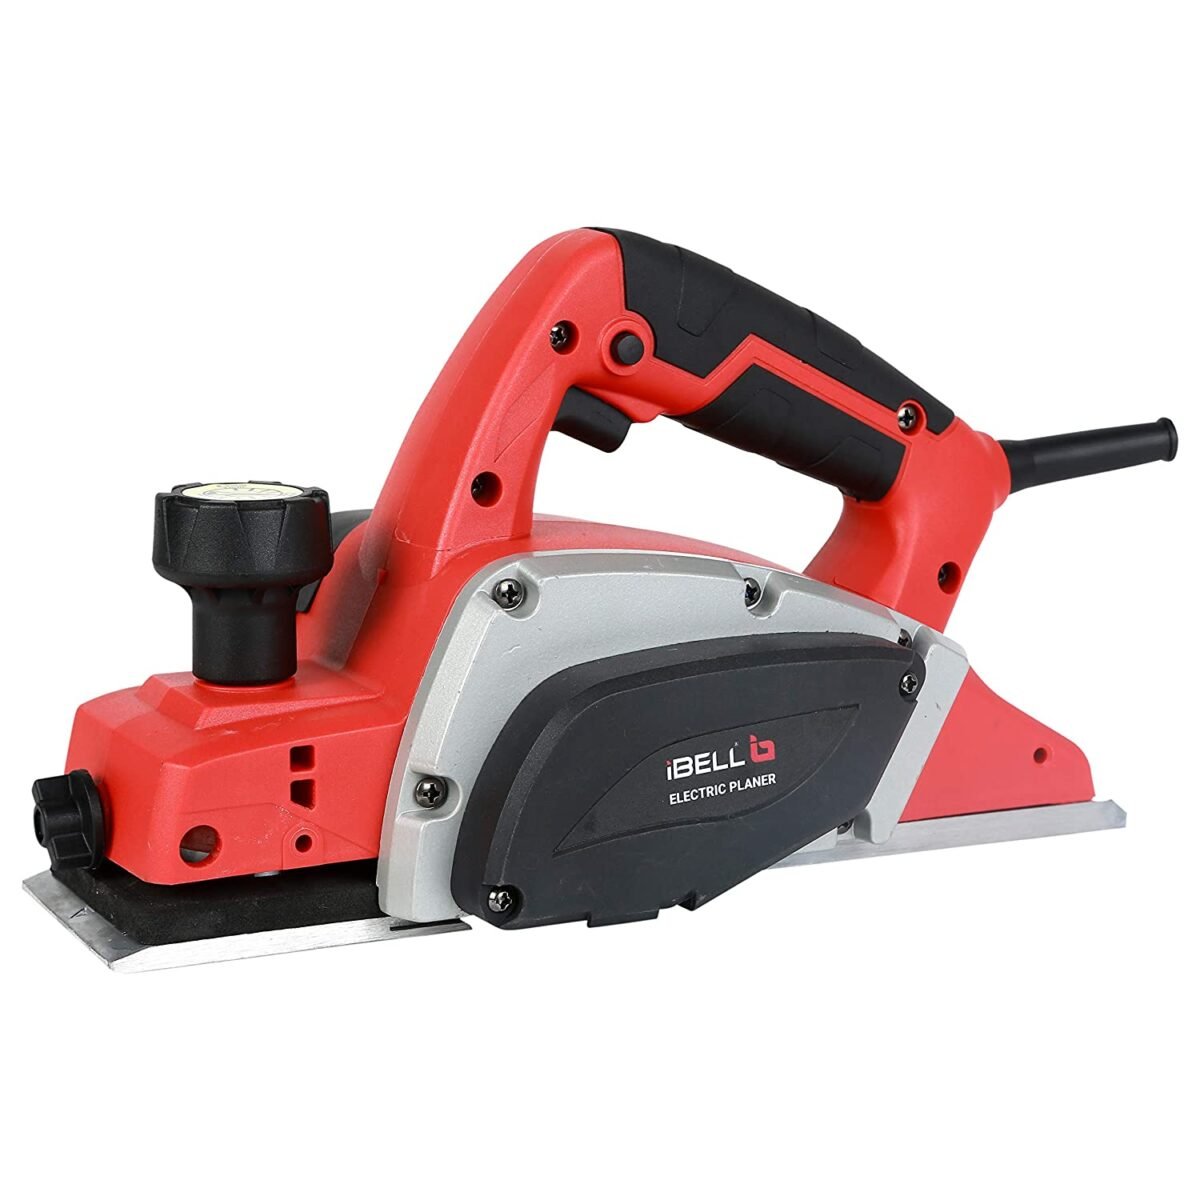 iBELL 82-58, 580W, 16500 RPM Electric Hand Planer( Red) - 6 Months Warranty